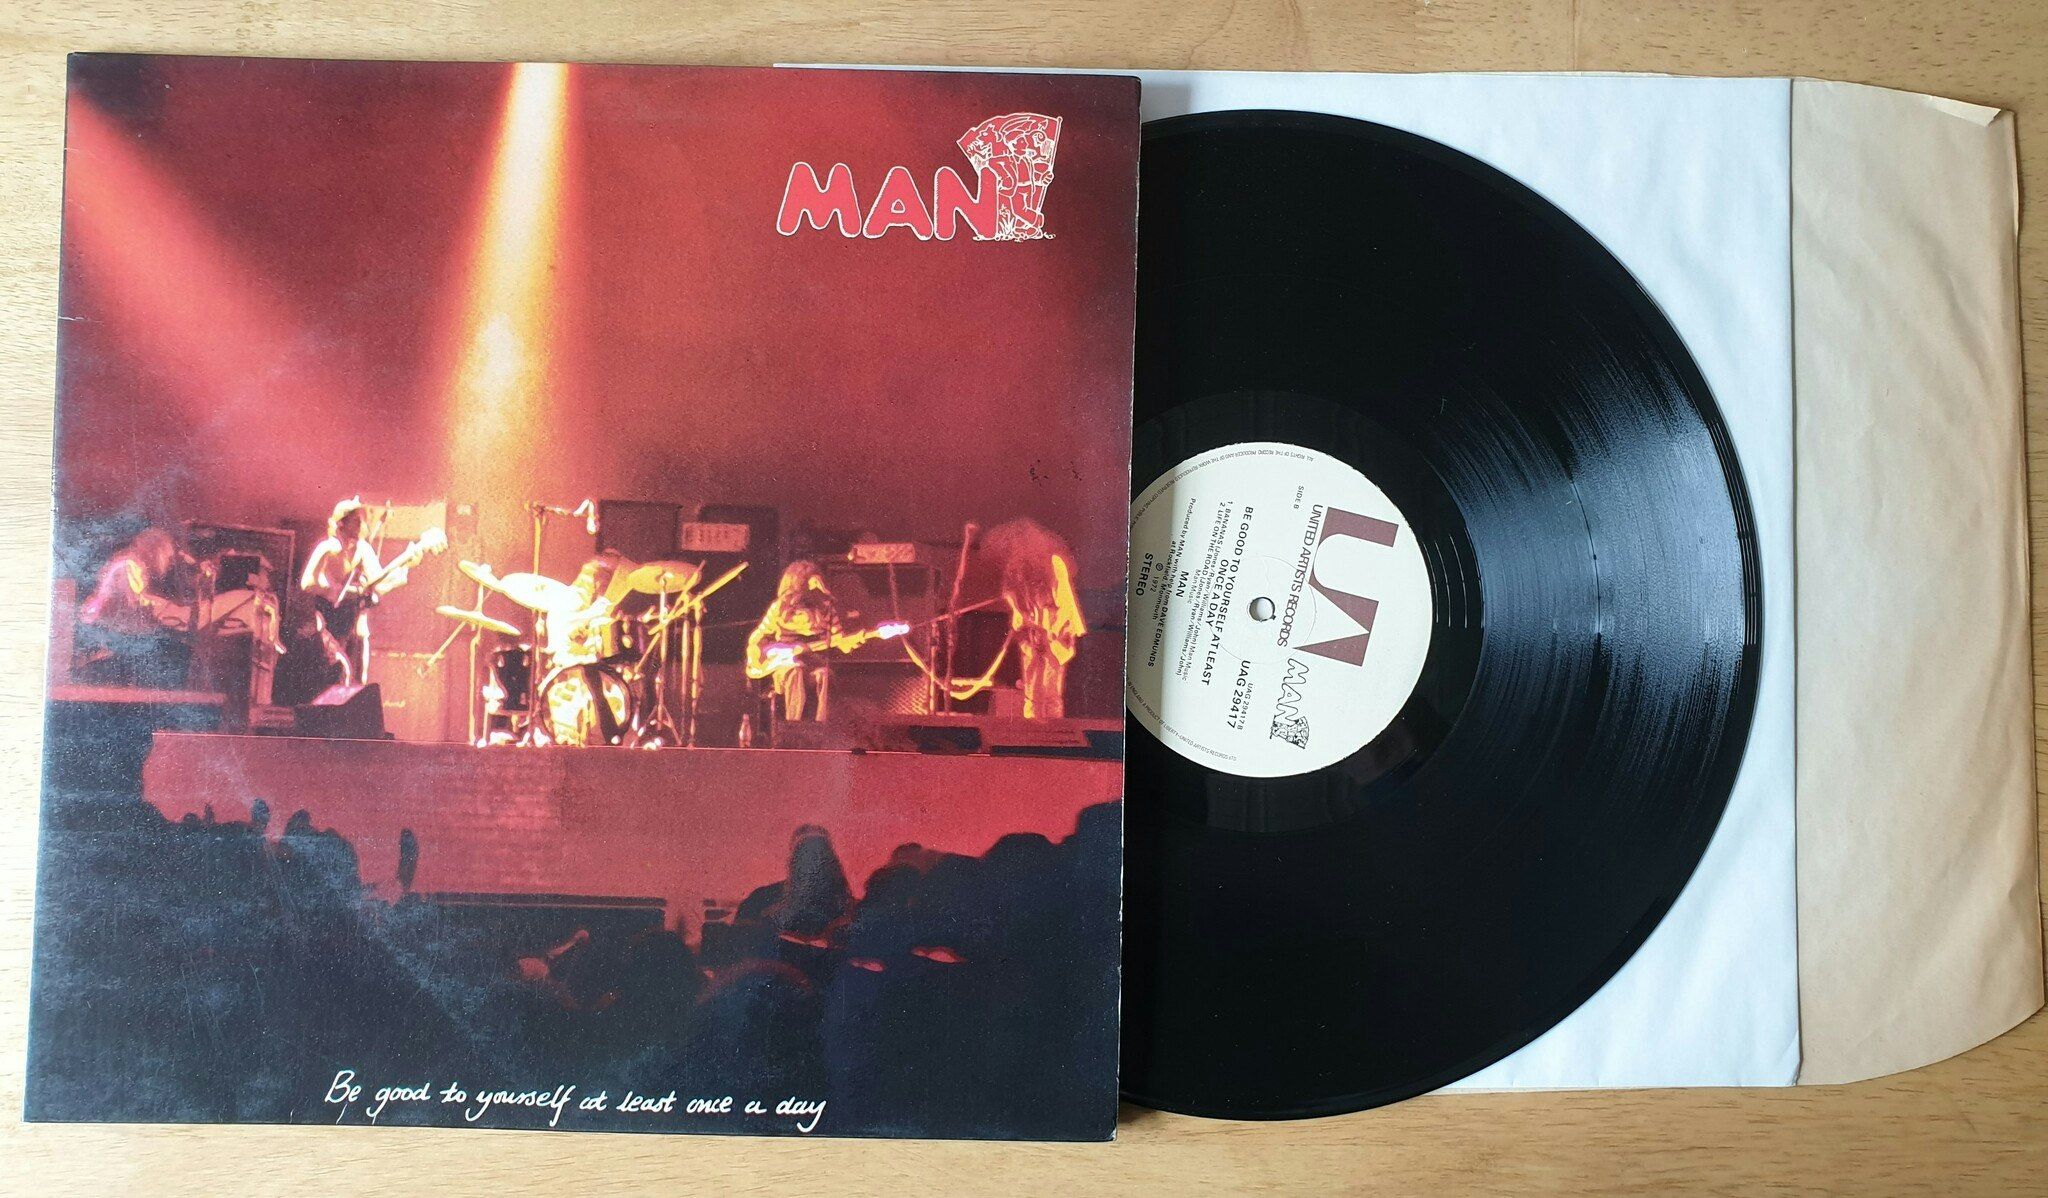 Man, Be good to yourself at least once a day. Vinyl LP